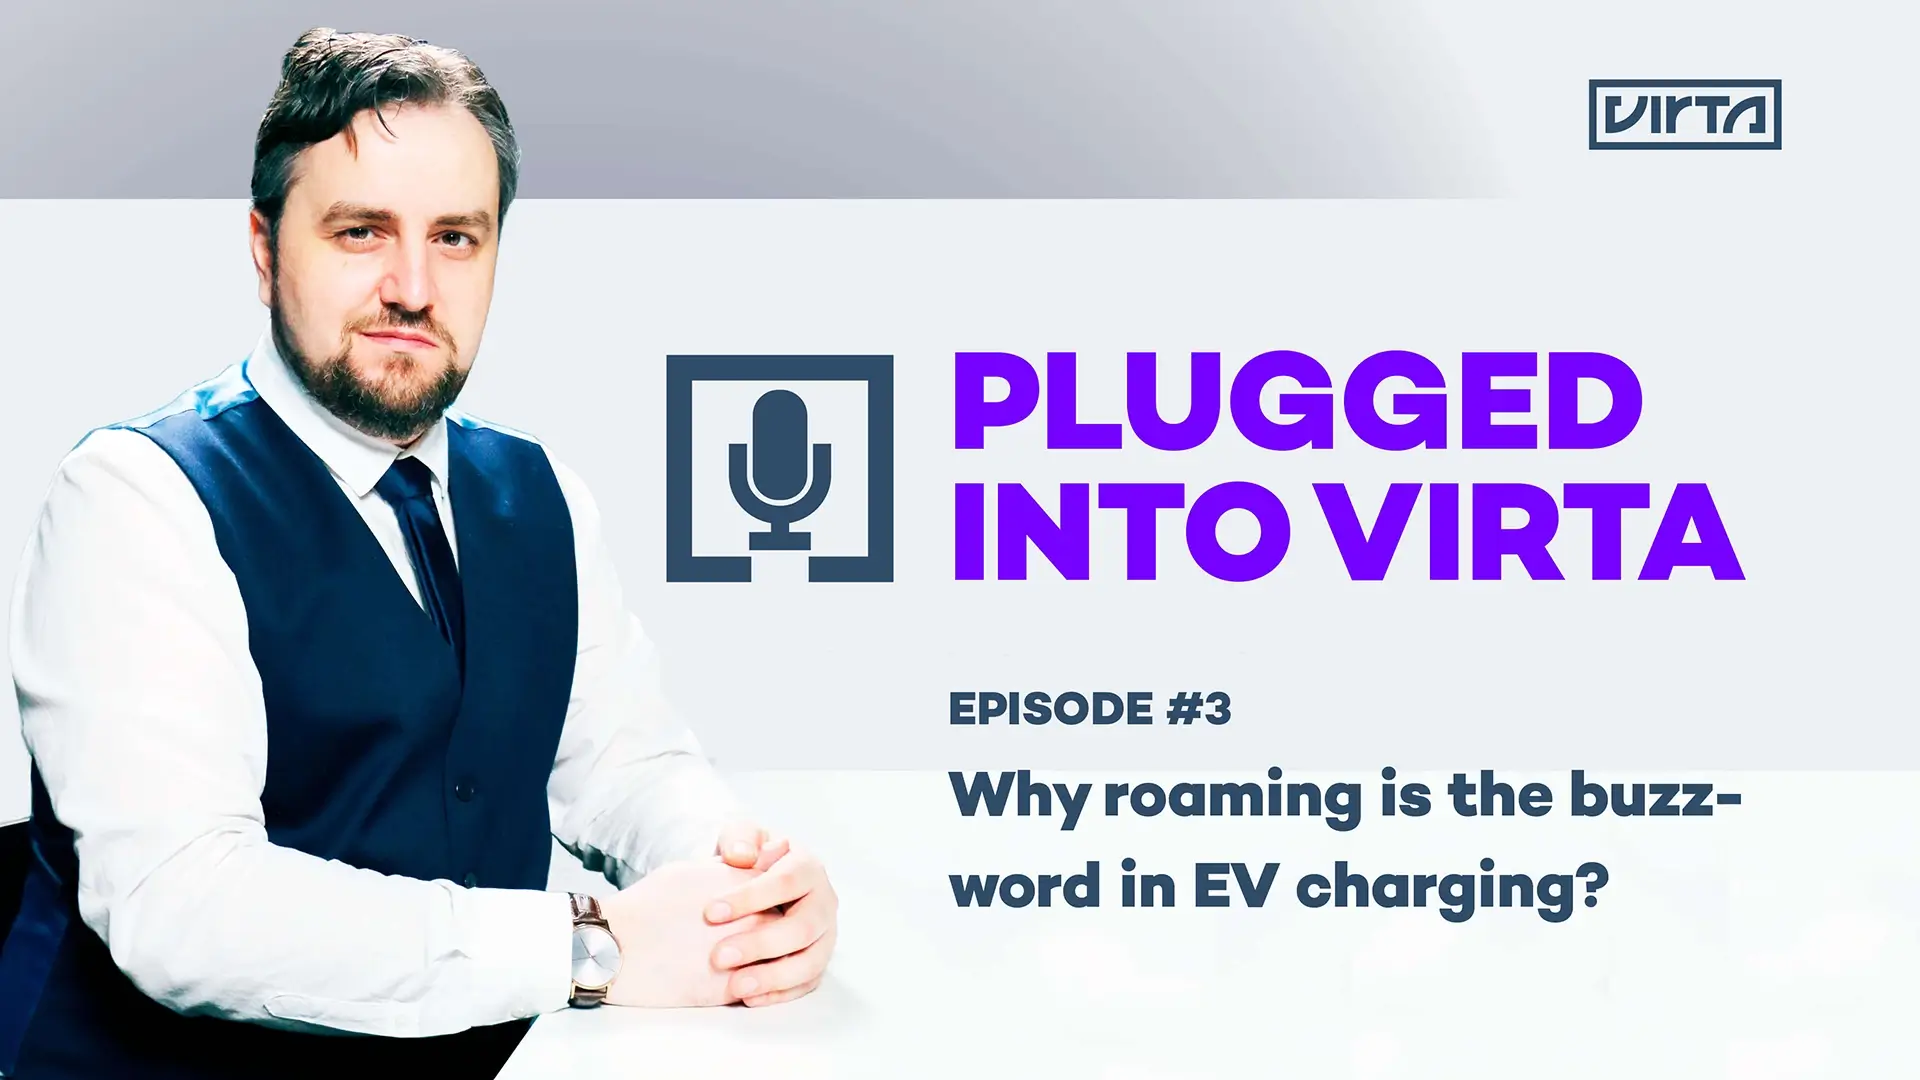 Plugged into Virta Episode 3 Why roaming is the buzzword in EV charging